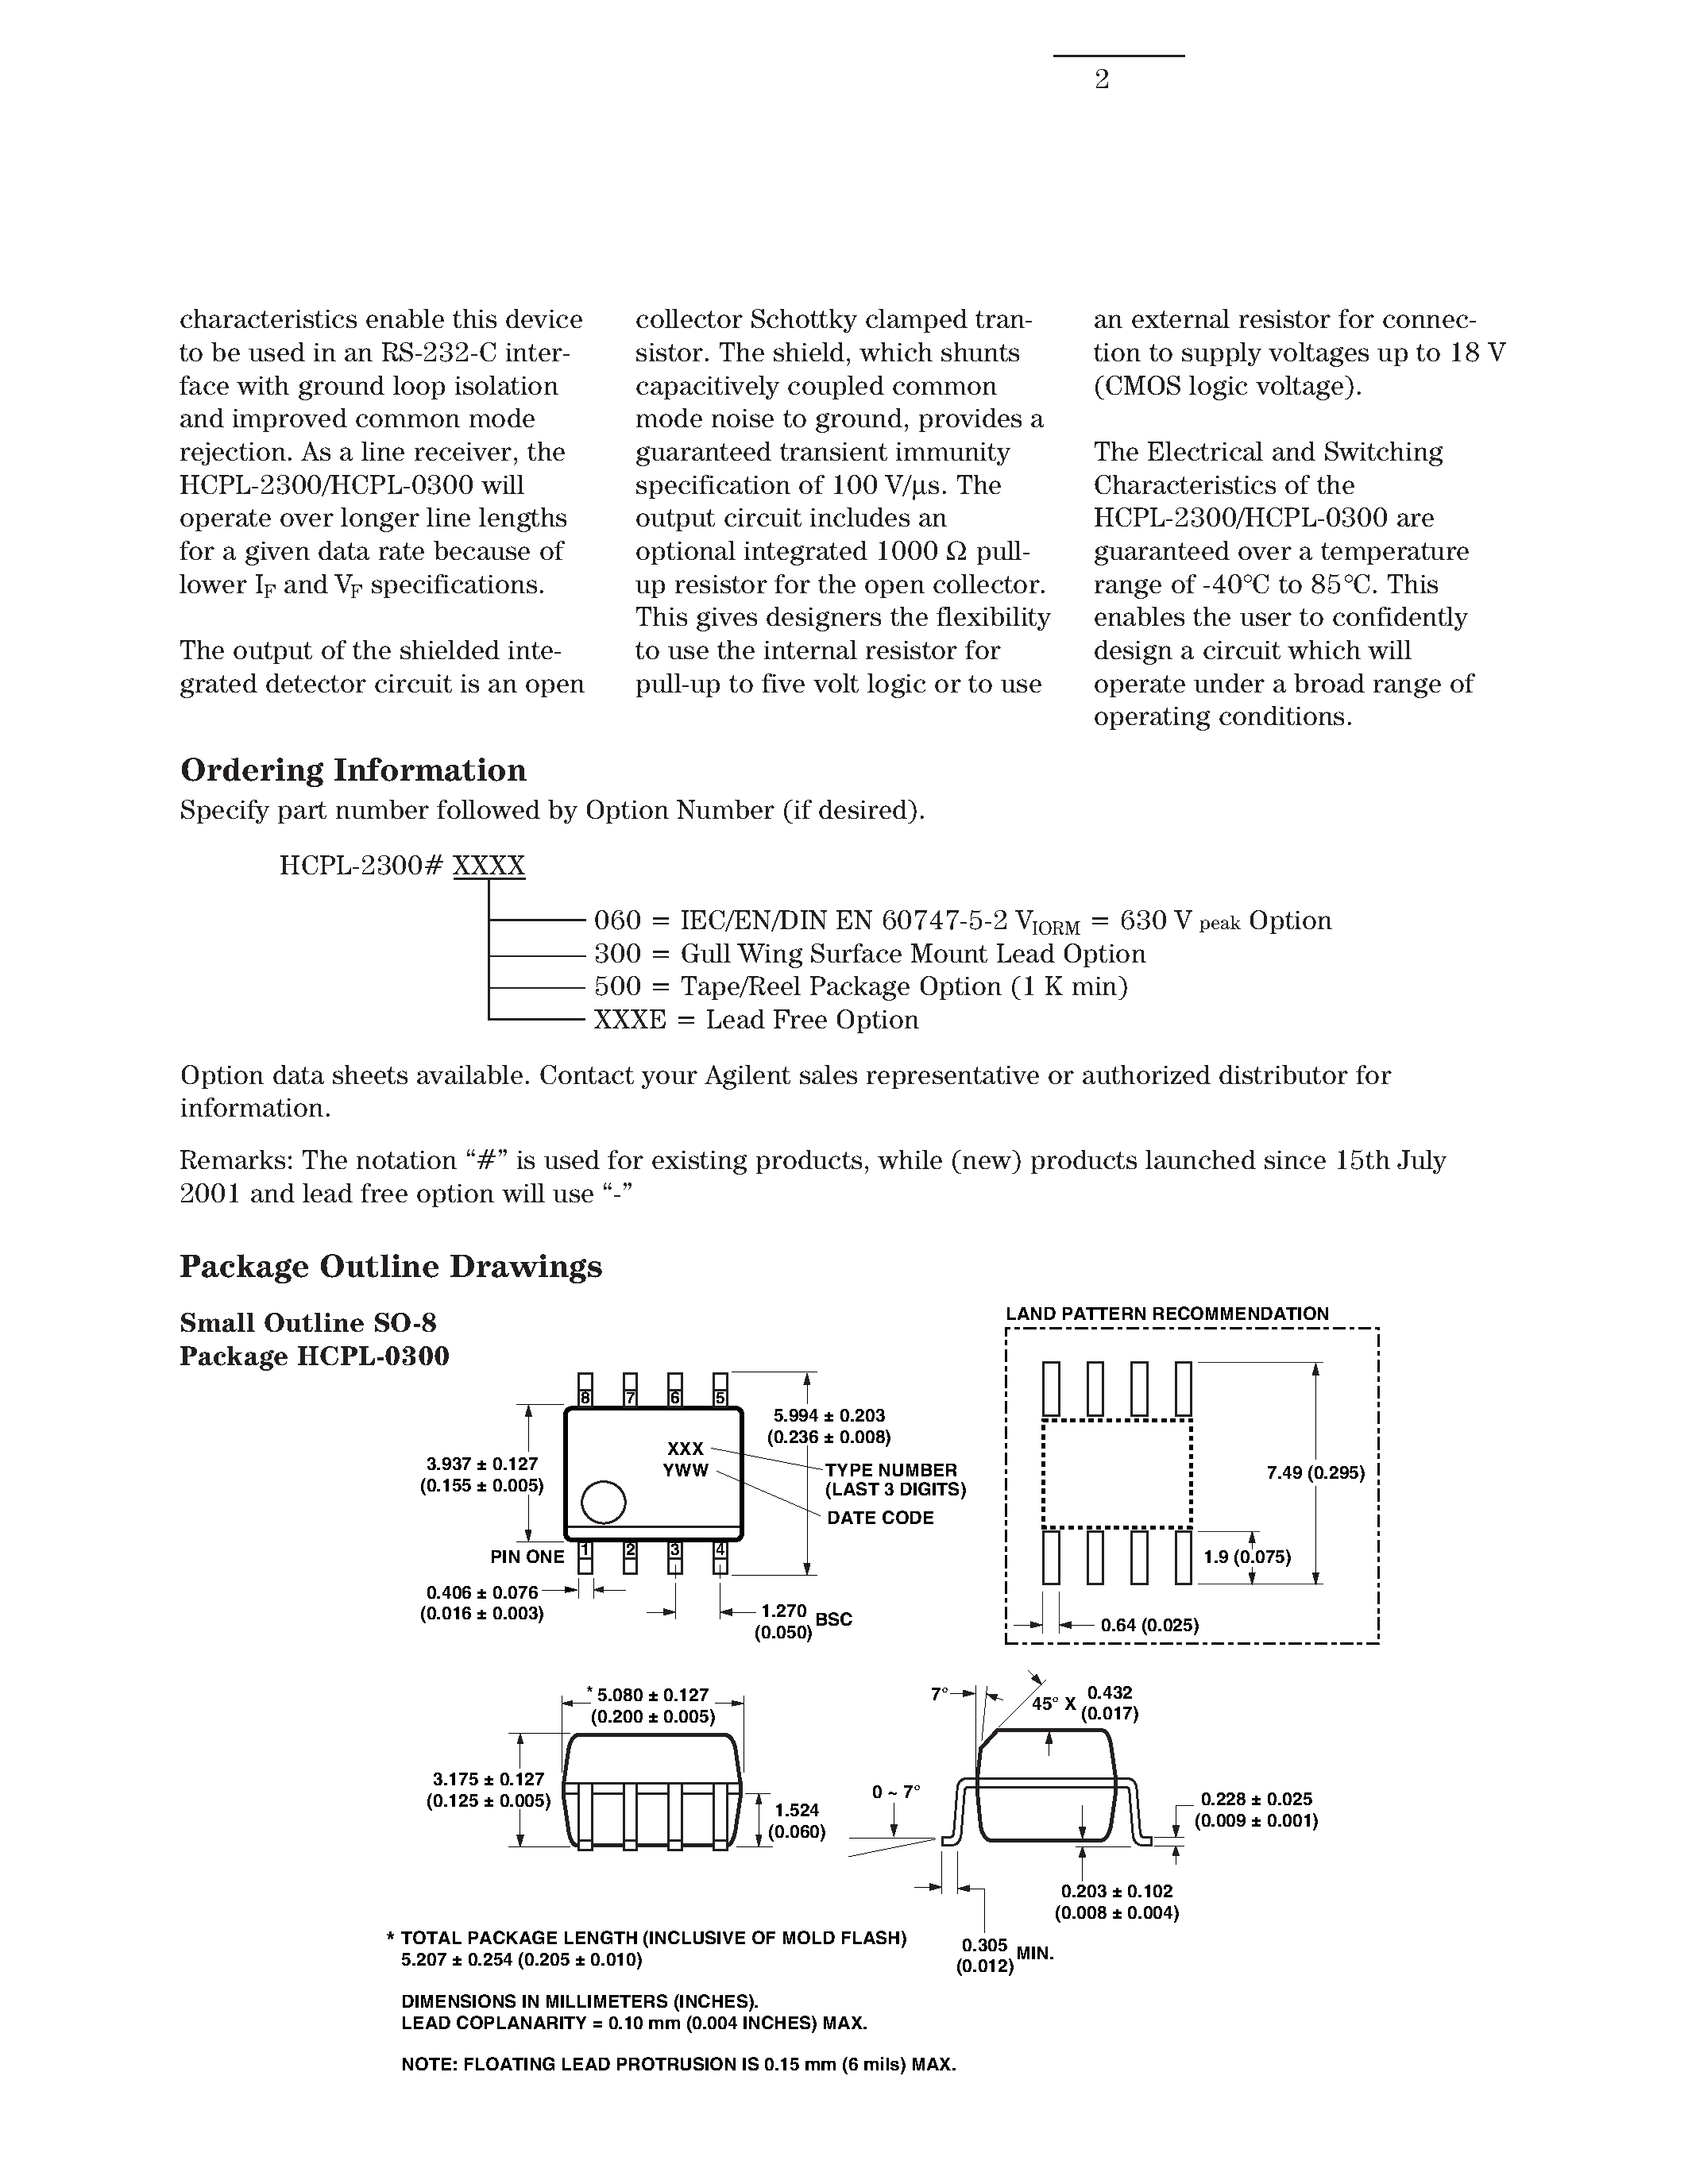 Datasheet HCPL-0300 - (HCPL-0300 / HCPL-2300) 8 MBd Low Input Current Optocoupler page 2